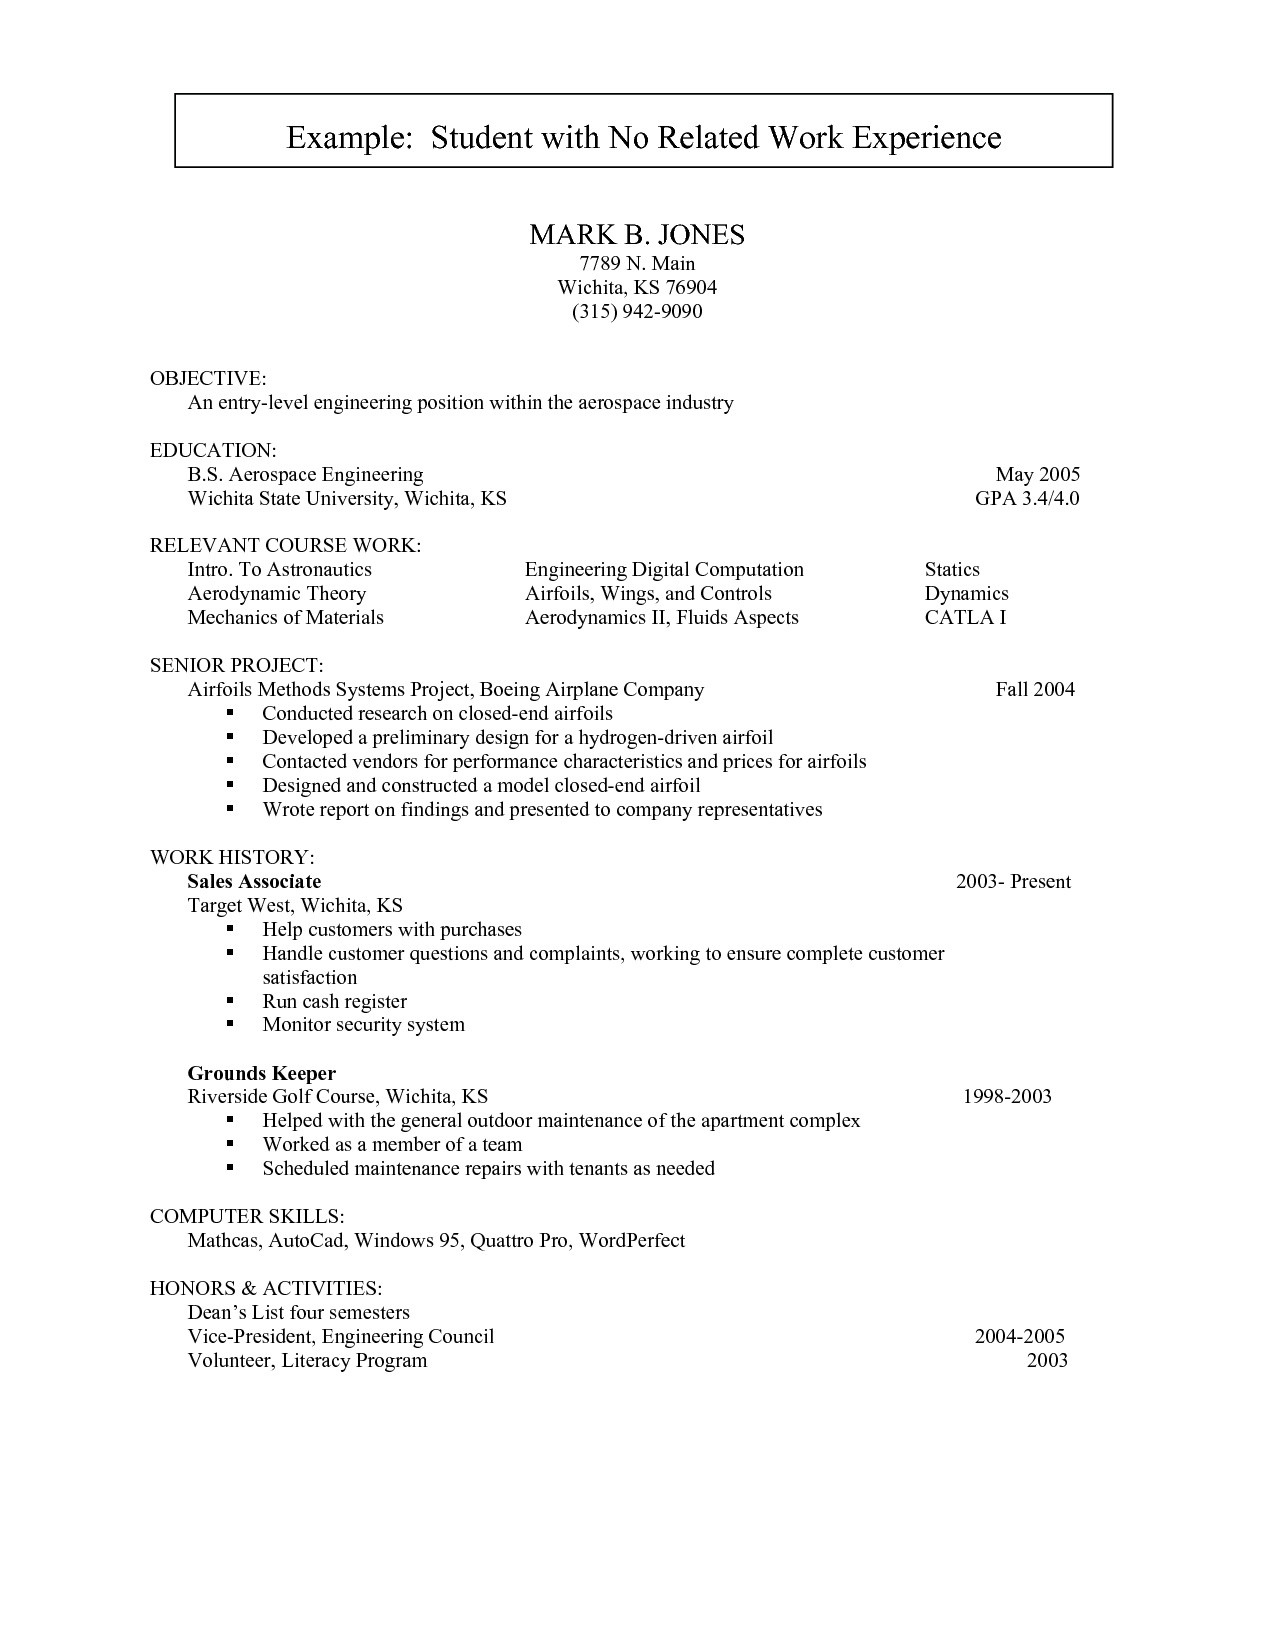 resume with no work experience samples